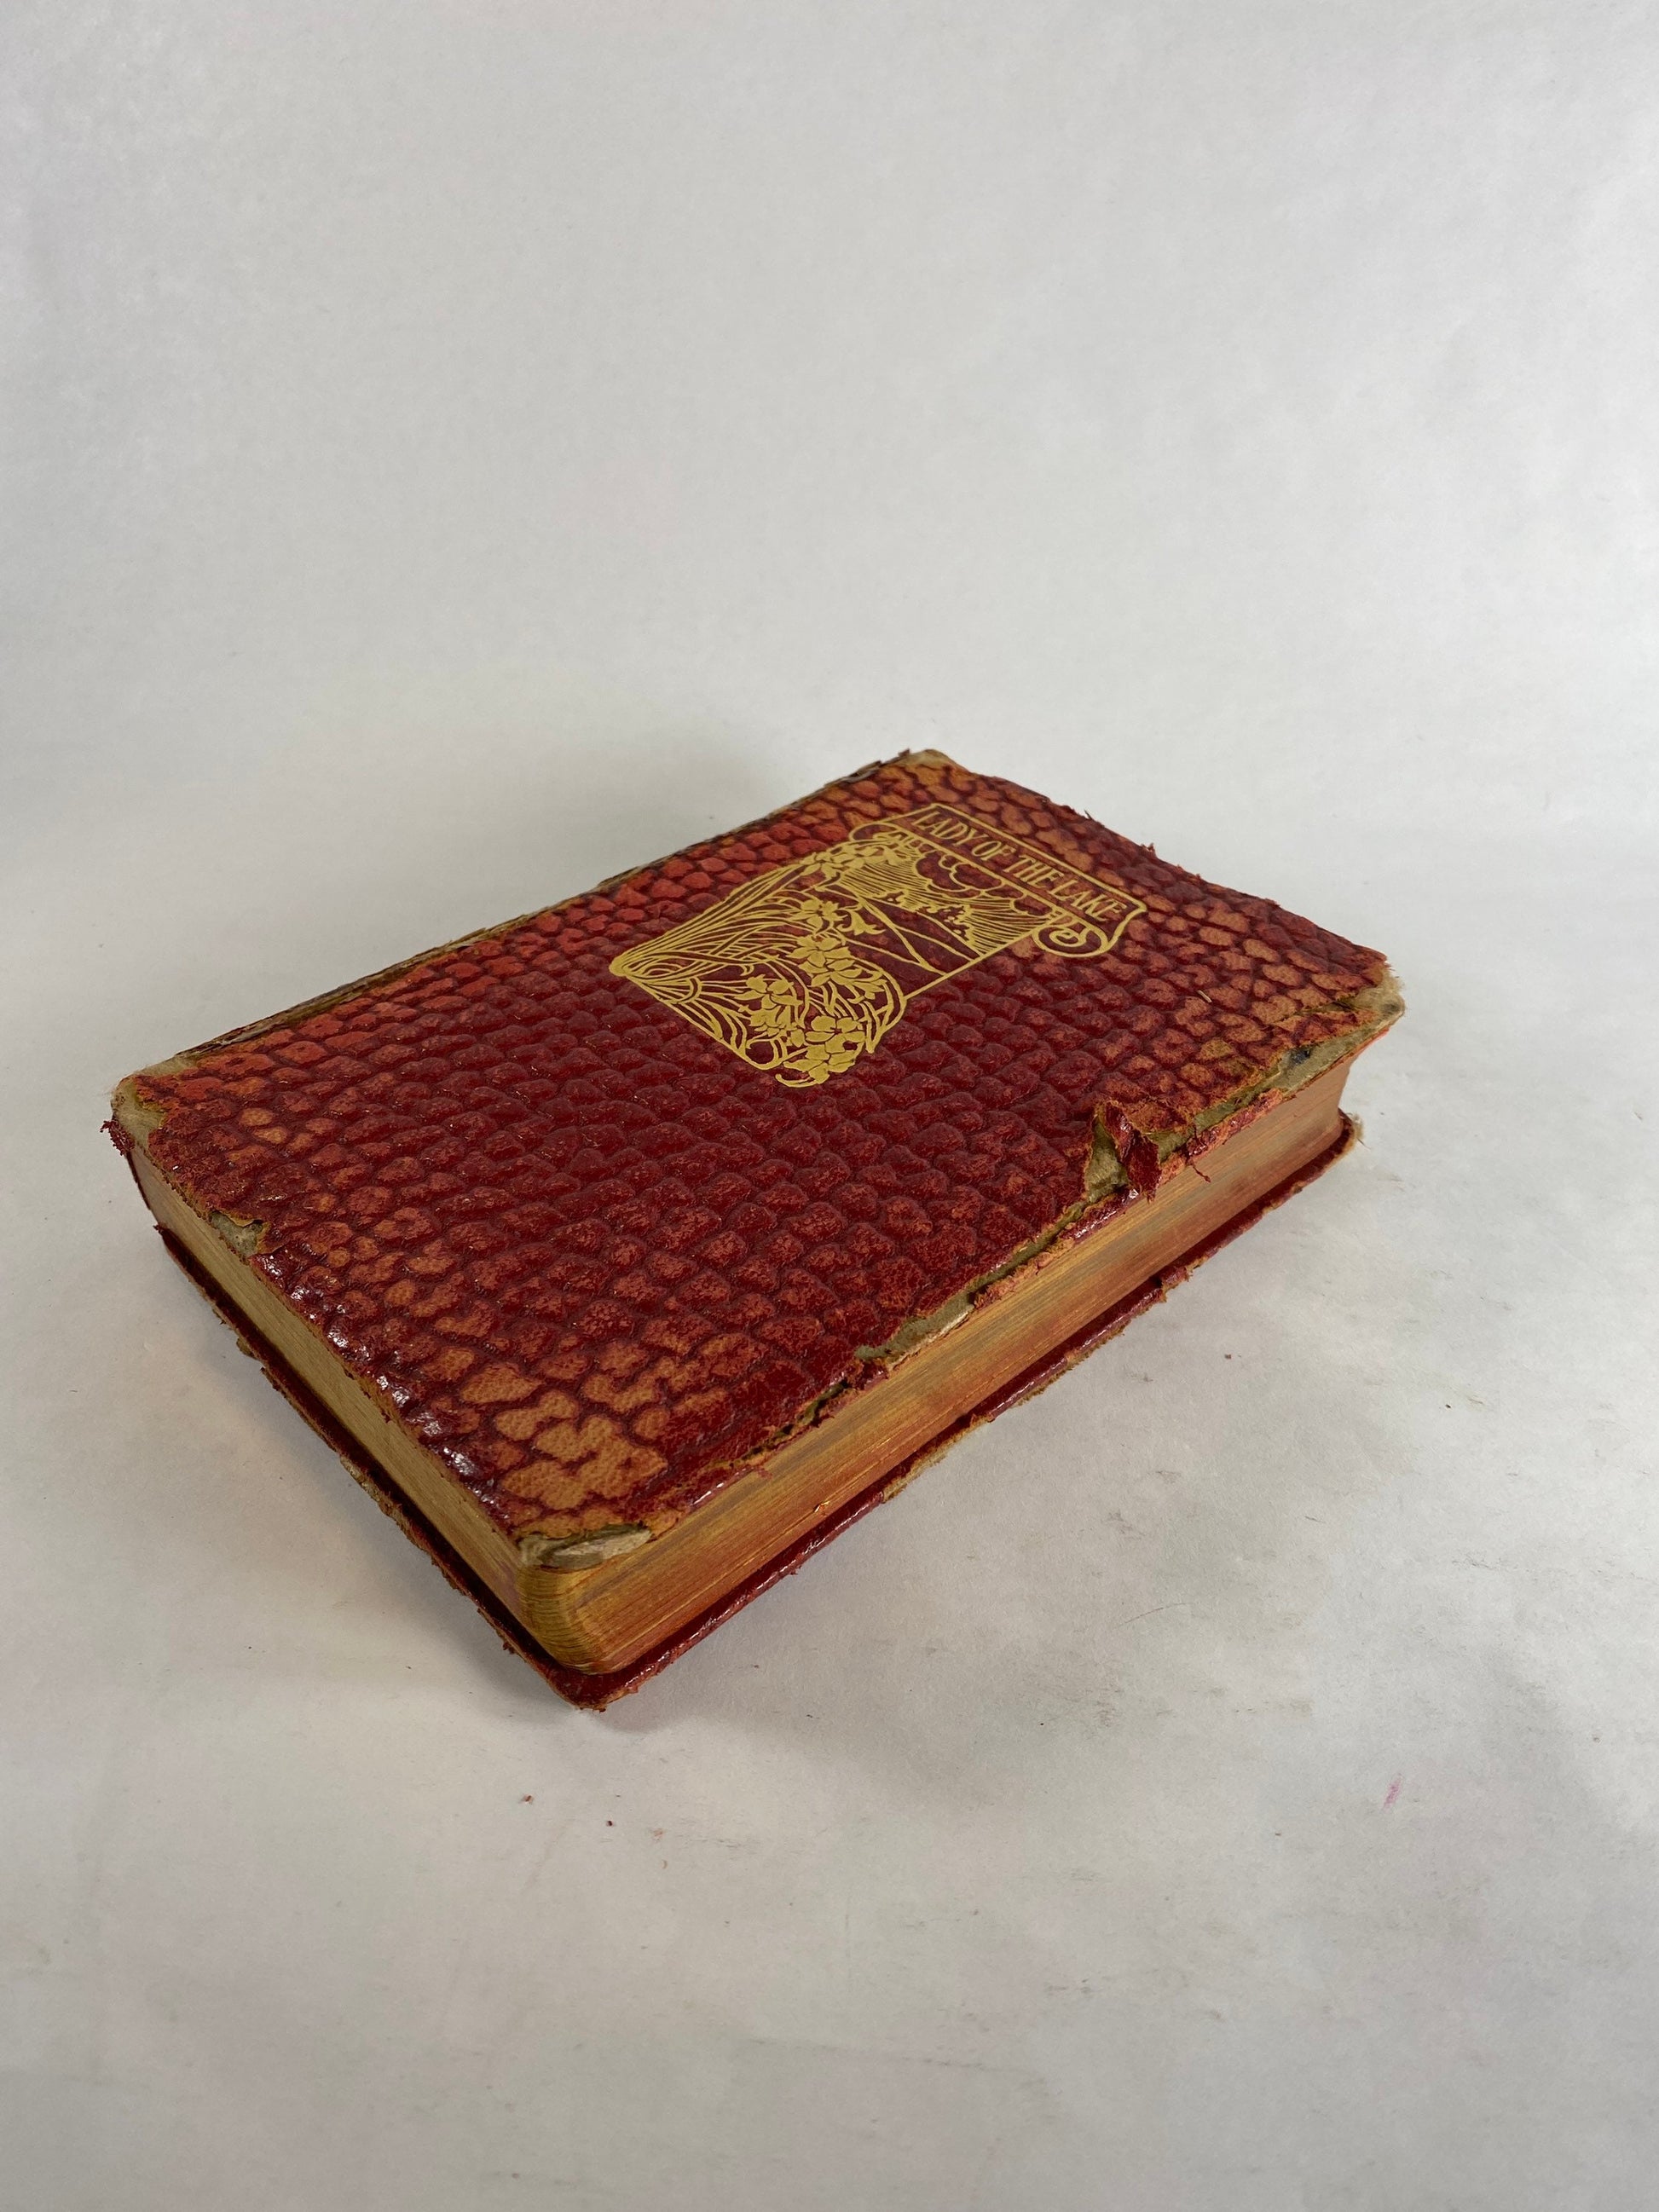 1920 Sir Walter Scott ANTIQUE leather book which inspired the Highland Revival! Lady of the Lake set in Trossachs Scotland